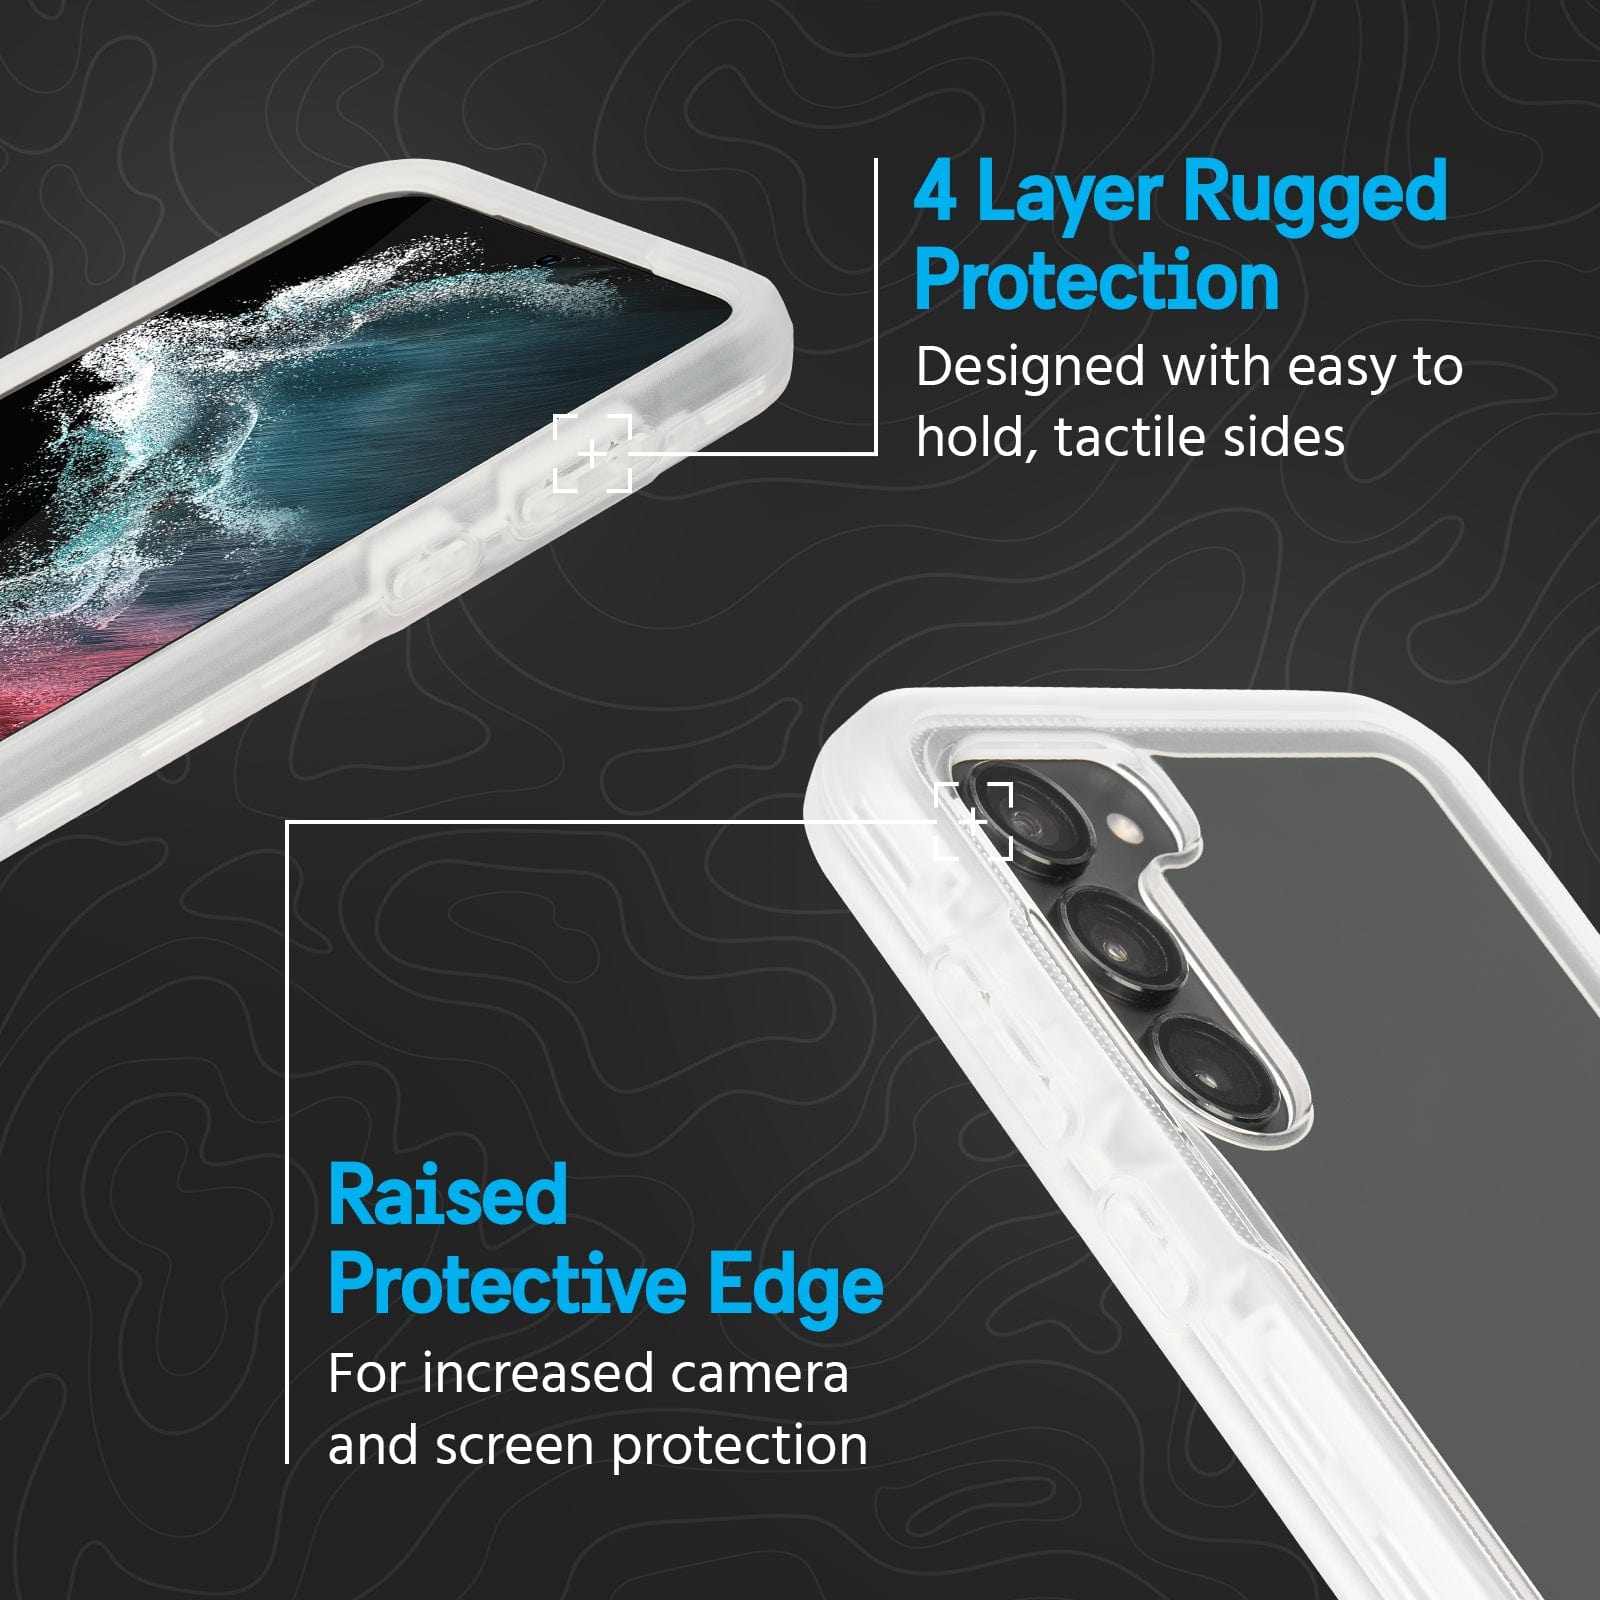 4 LAYER RUGGED PROTECTION. DESIGNED WITH EASY TO HOLD, TACTILE SIDES. RAISED PROTECTIVE EDGE FOR INCREASED CAMERA AND SCREEN PROTECTION.